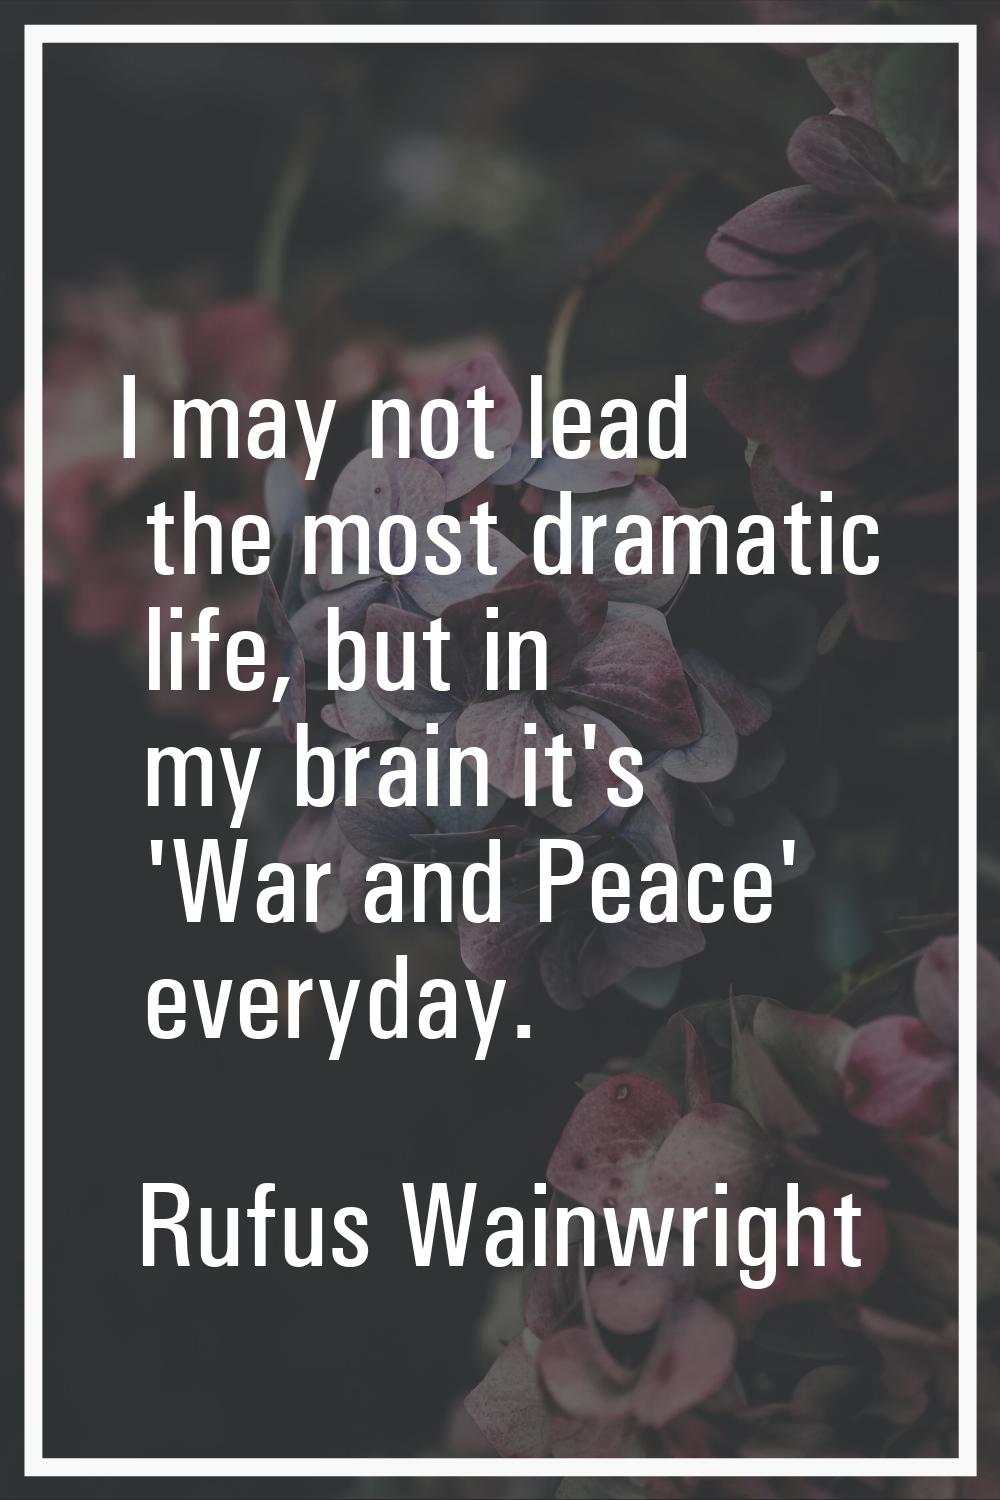 I may not lead the most dramatic life, but in my brain it's 'War and Peace' everyday.